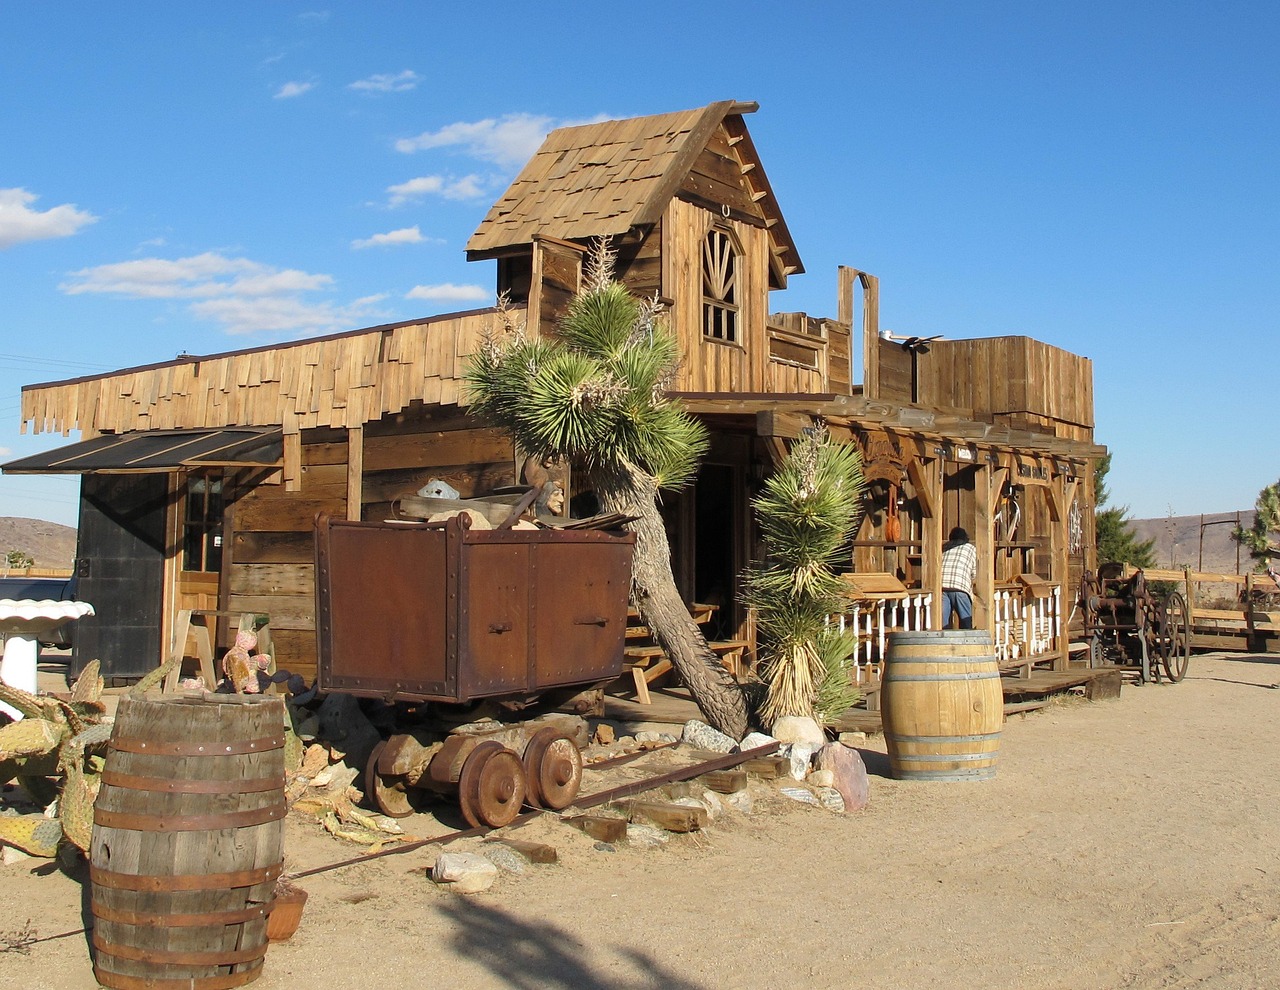 a wooden building sitting in the middle of a desert, by Linda Sutton, flickr, renaissance, a steampunk store, mule, replica model, log houses built on hills